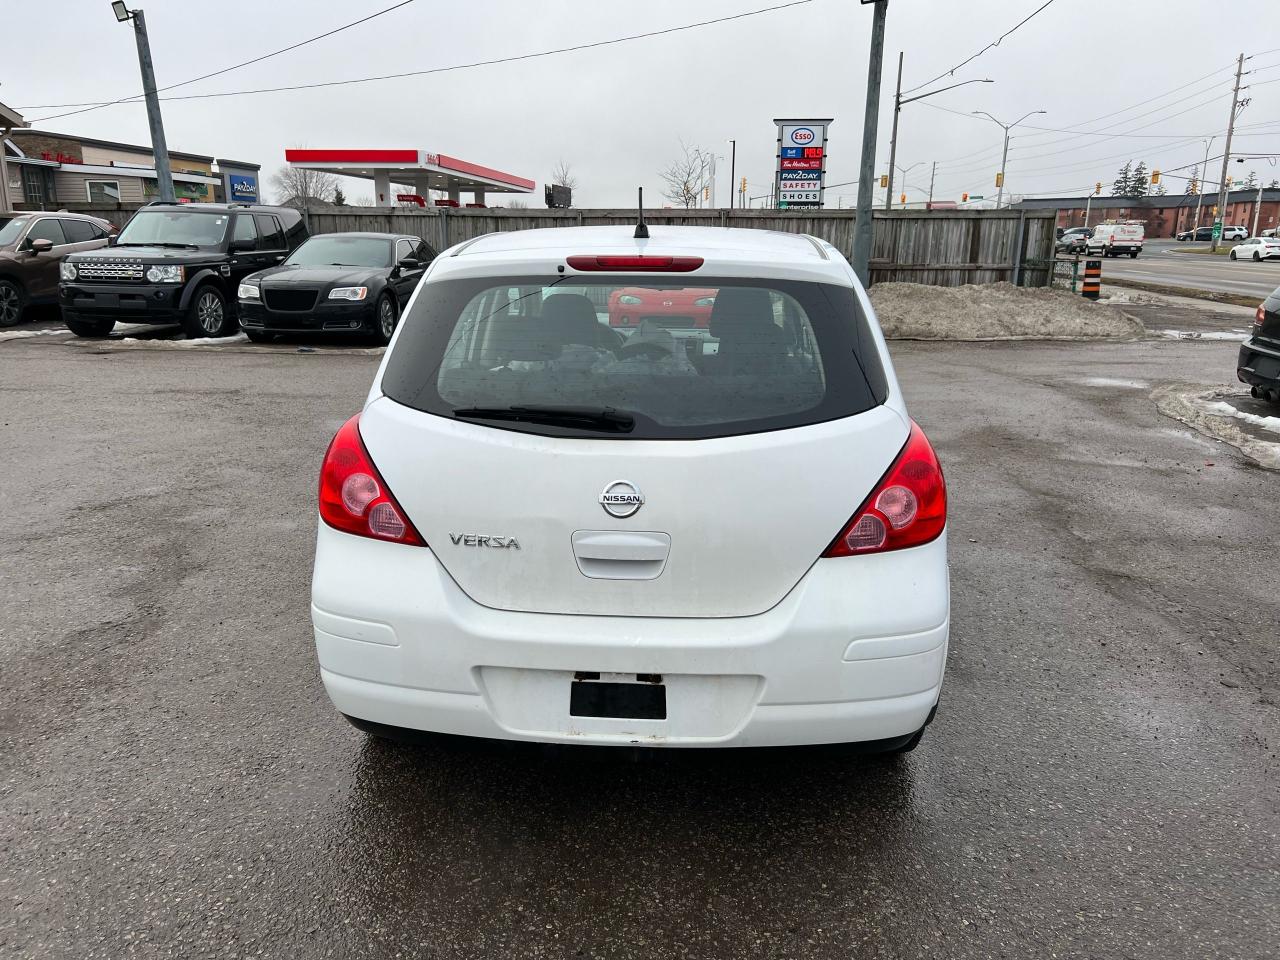 2009 Nissan Versa 1.8 S**MANUAL**NO ACCIDENTS**CERTIFIED - Photo #4